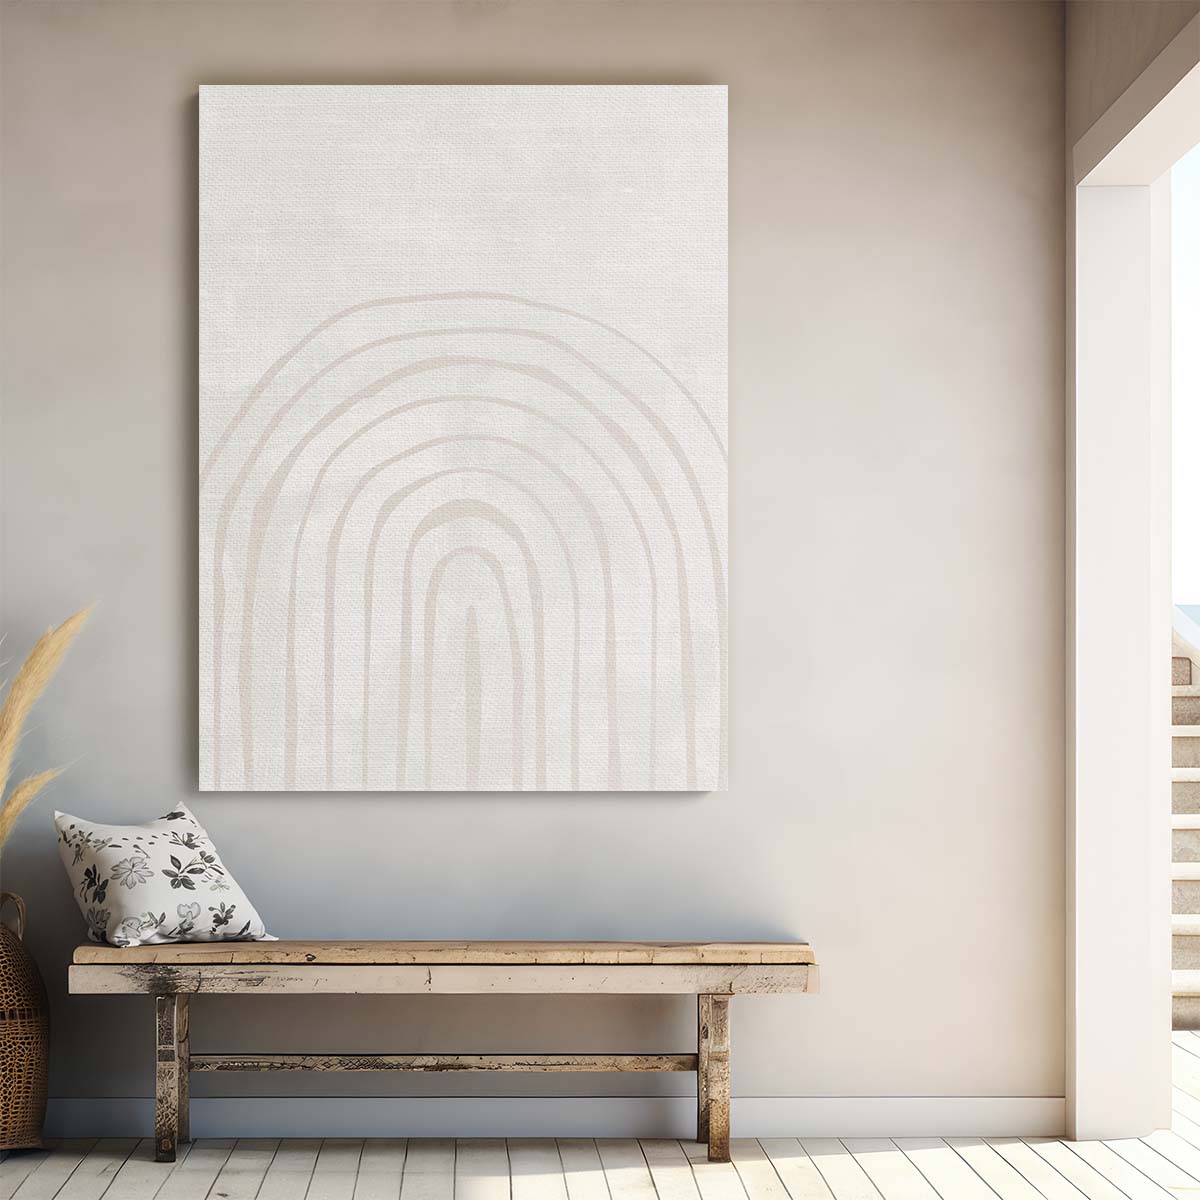 Abstract Beige Arch Geometry Illustration - Symmetrical Graphic Artwork by Luxuriance Designs, made in USA